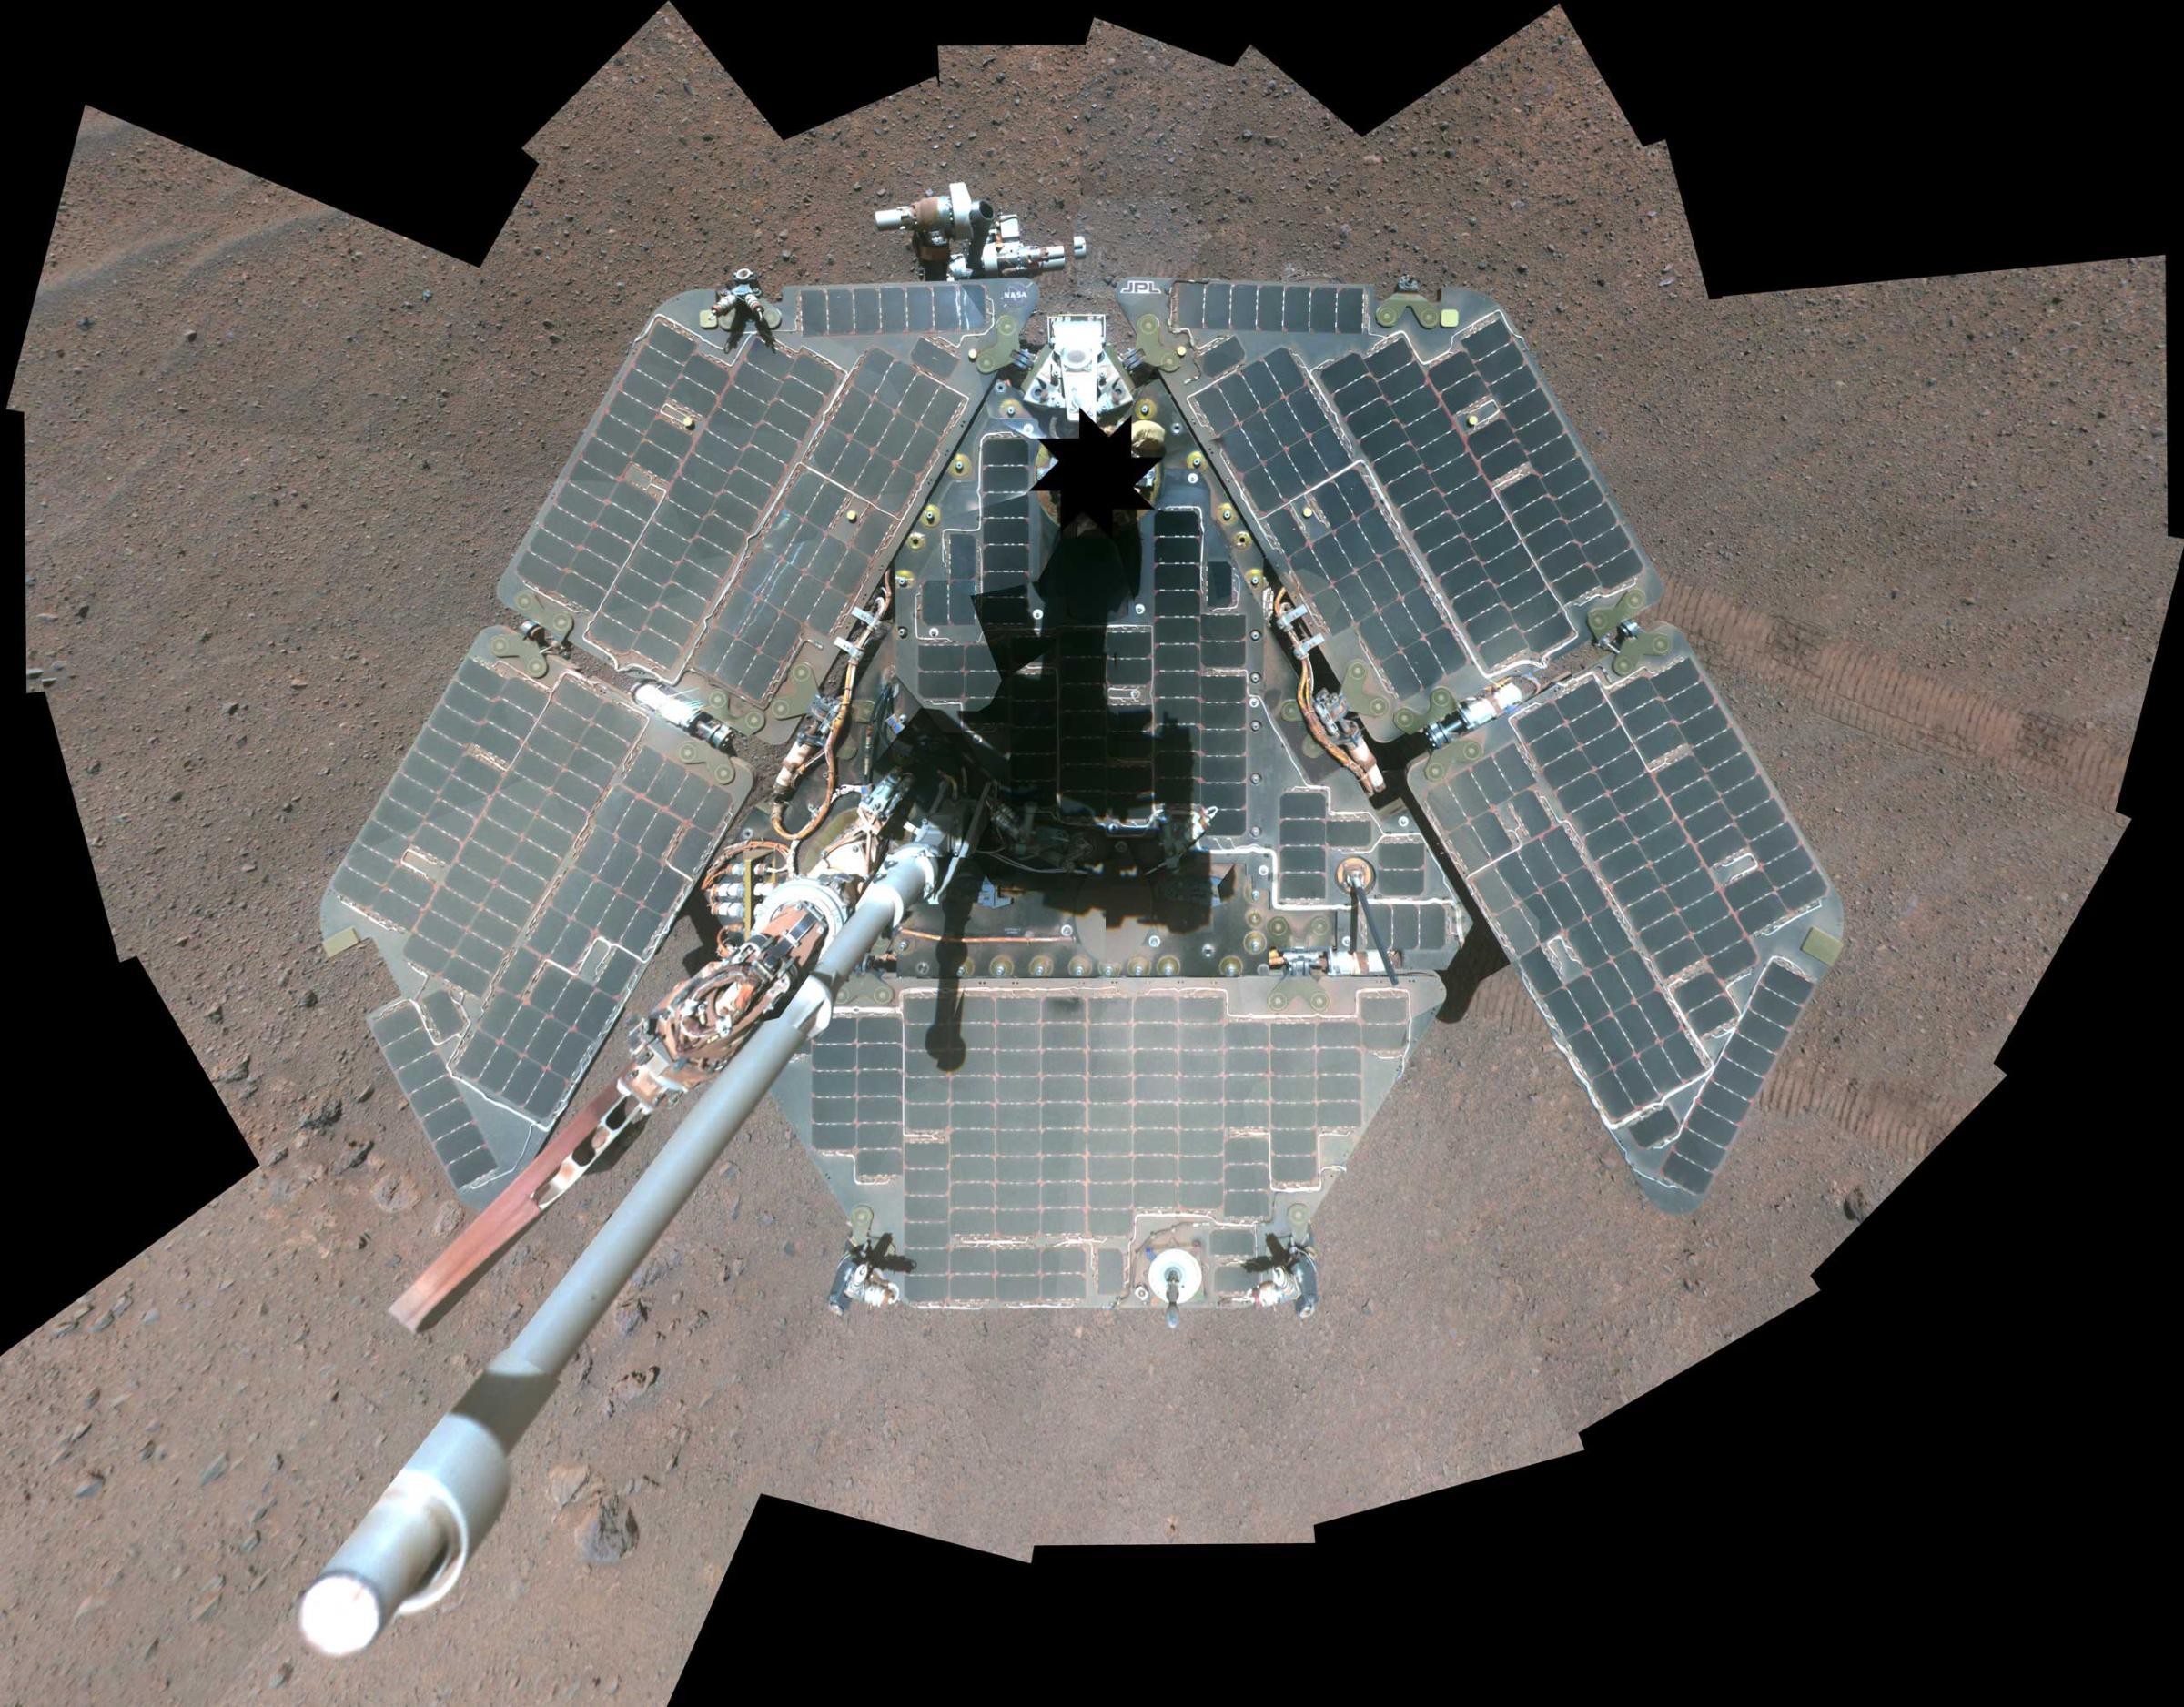 A self-portrait of the Opportunity rover shortly after dust cleared its solar panels in March 2014.